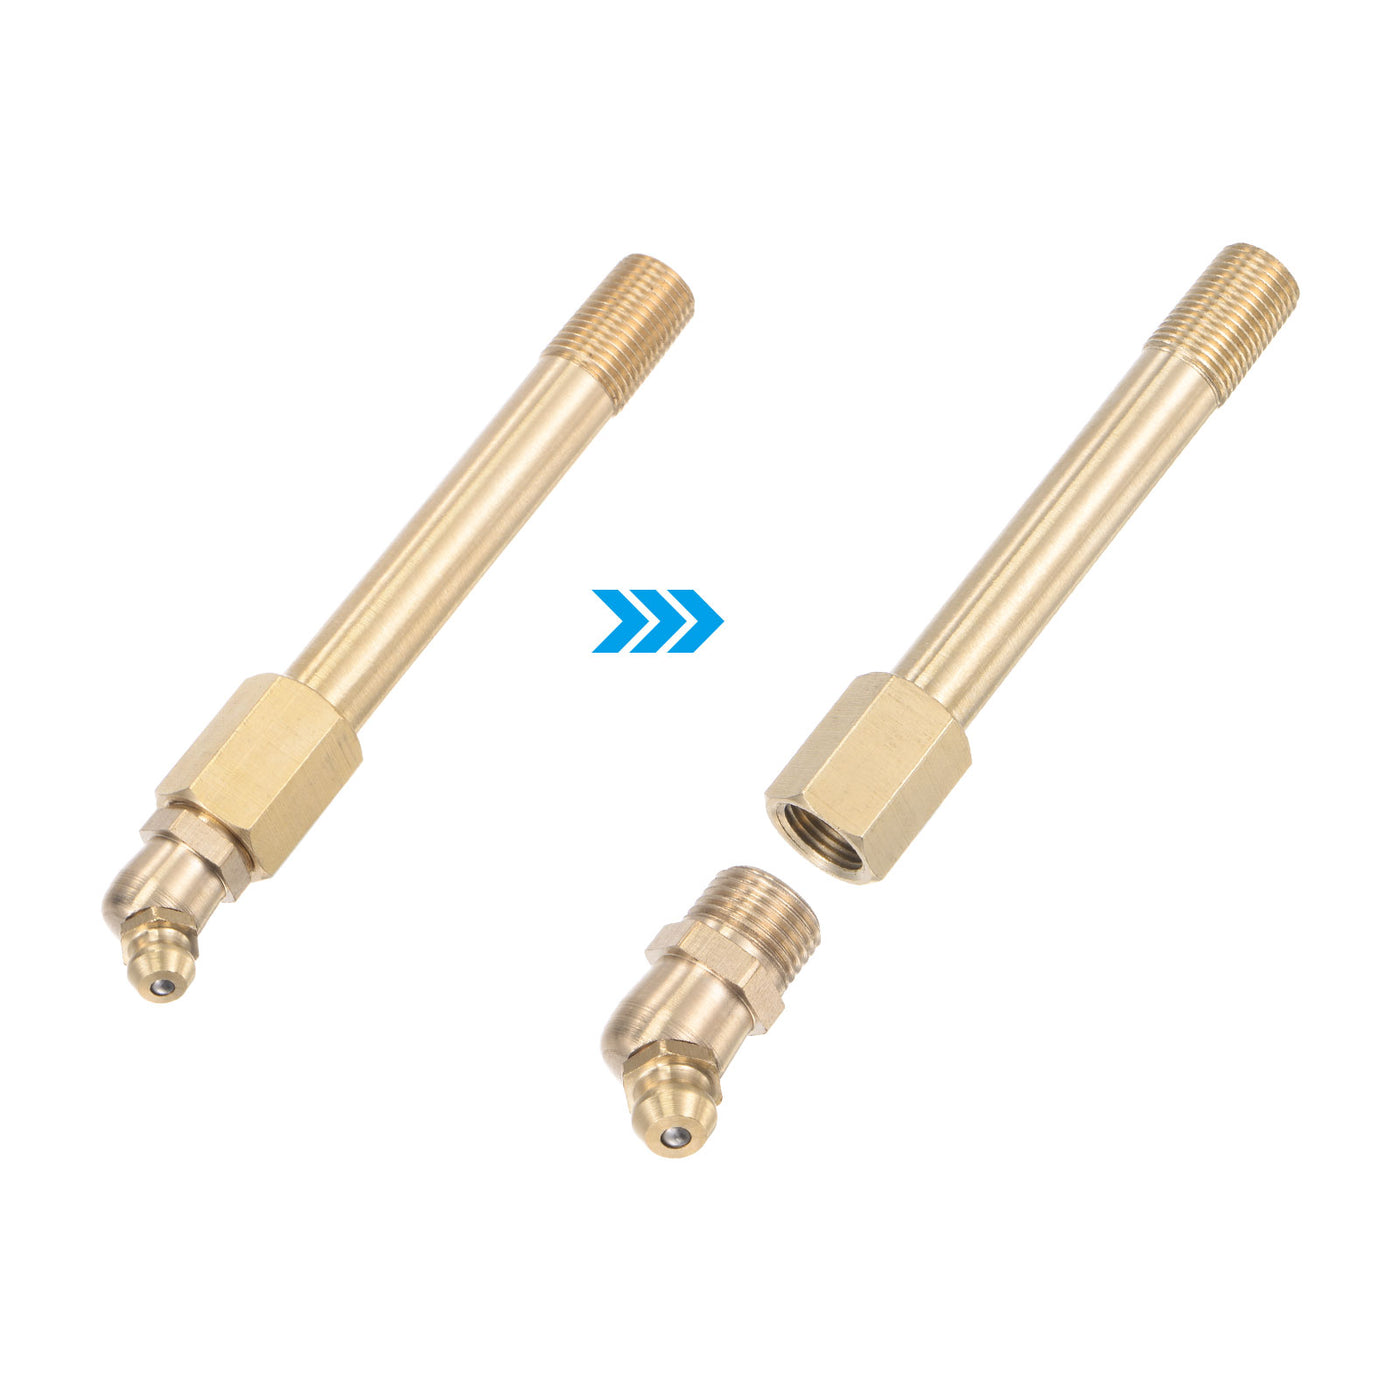 uxcell Uxcell Brass Straight Hydraulic Grease Fitting G1/8 Thread 90mm Length, 2Pcs